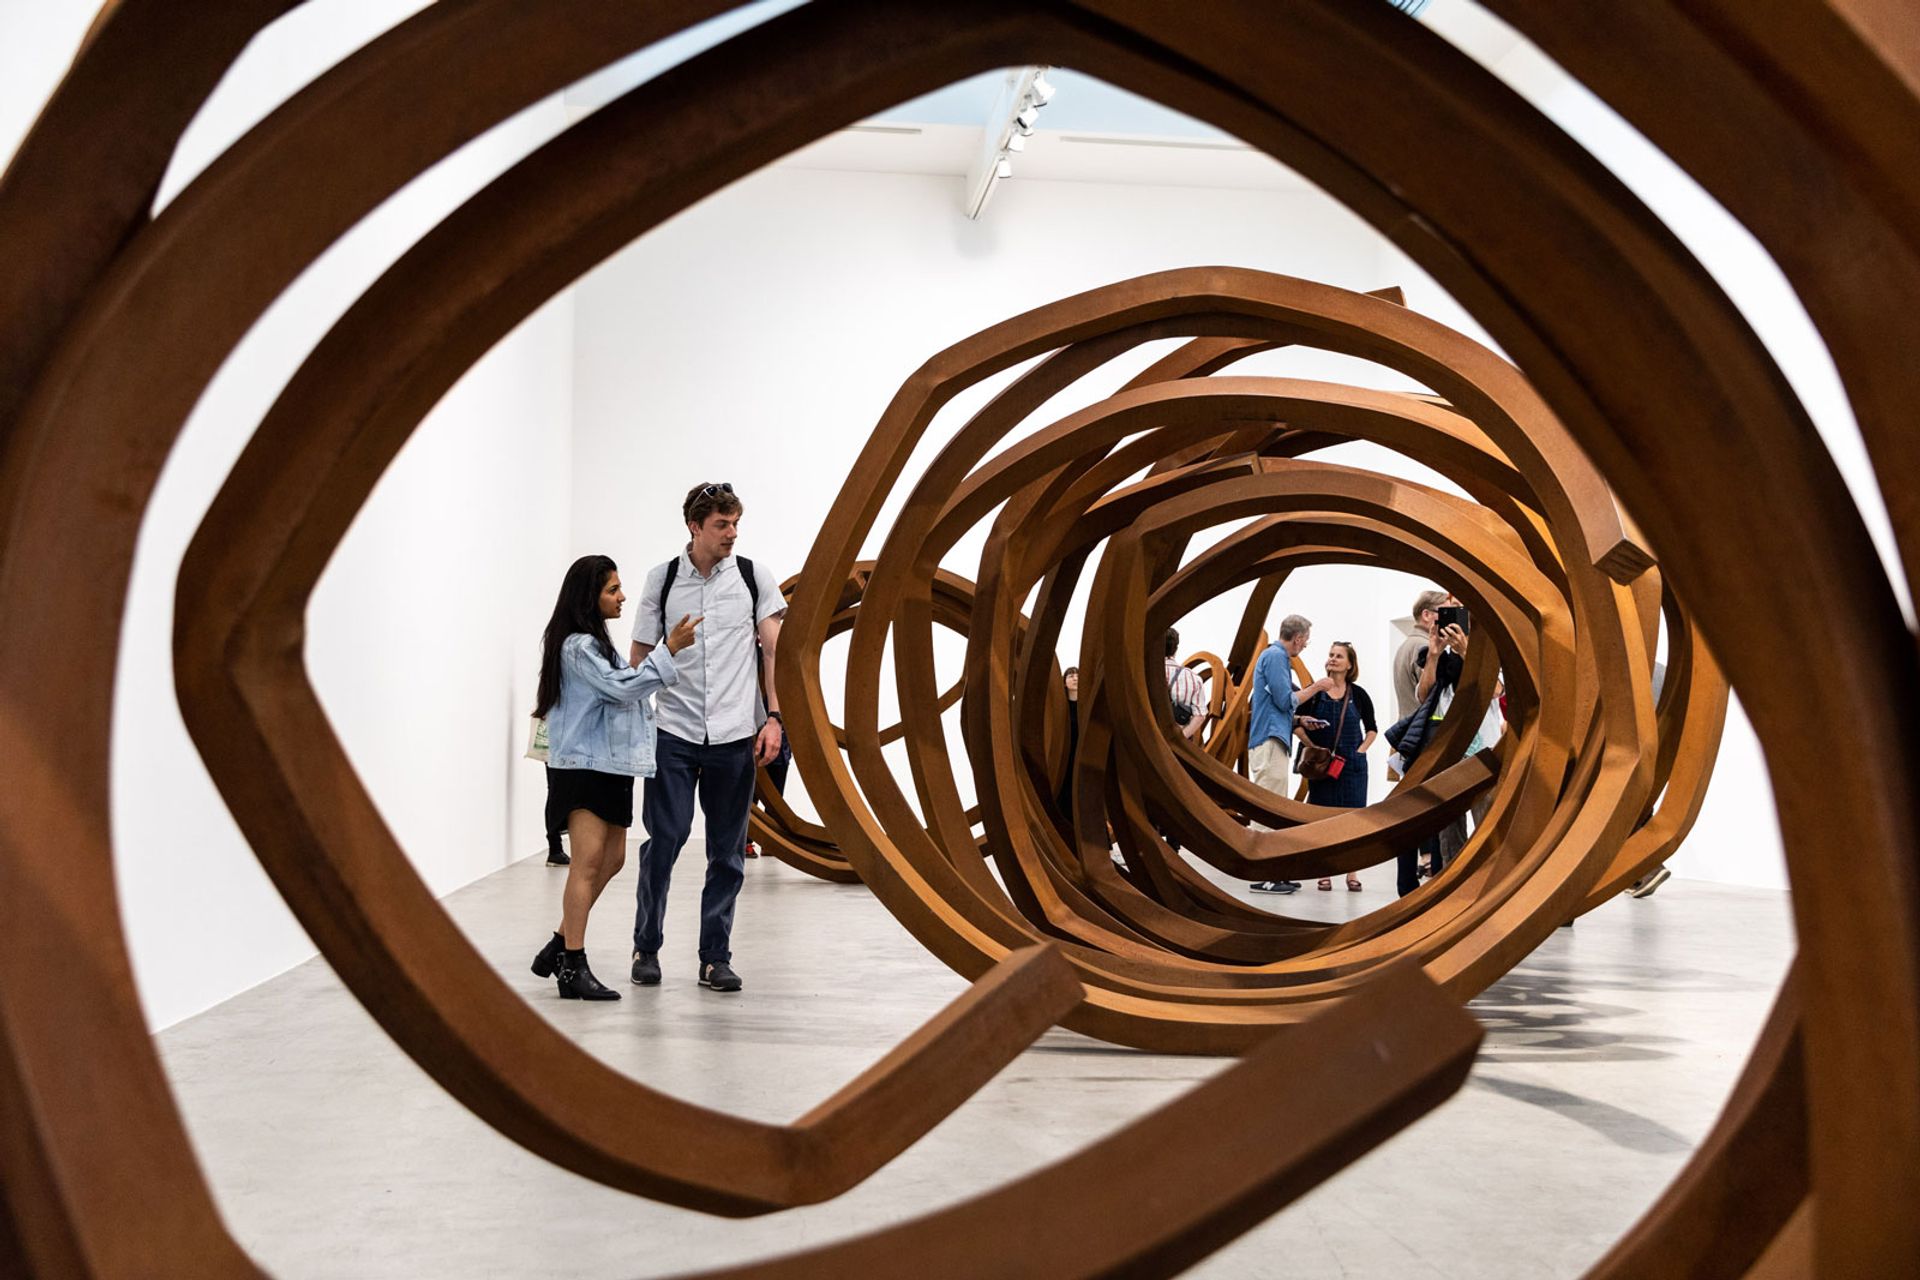 Berlin Gallery Weekend has been accused of featuring too many white male artists, such as Bernar Venet at Blain | Southern © Clemens Porikys